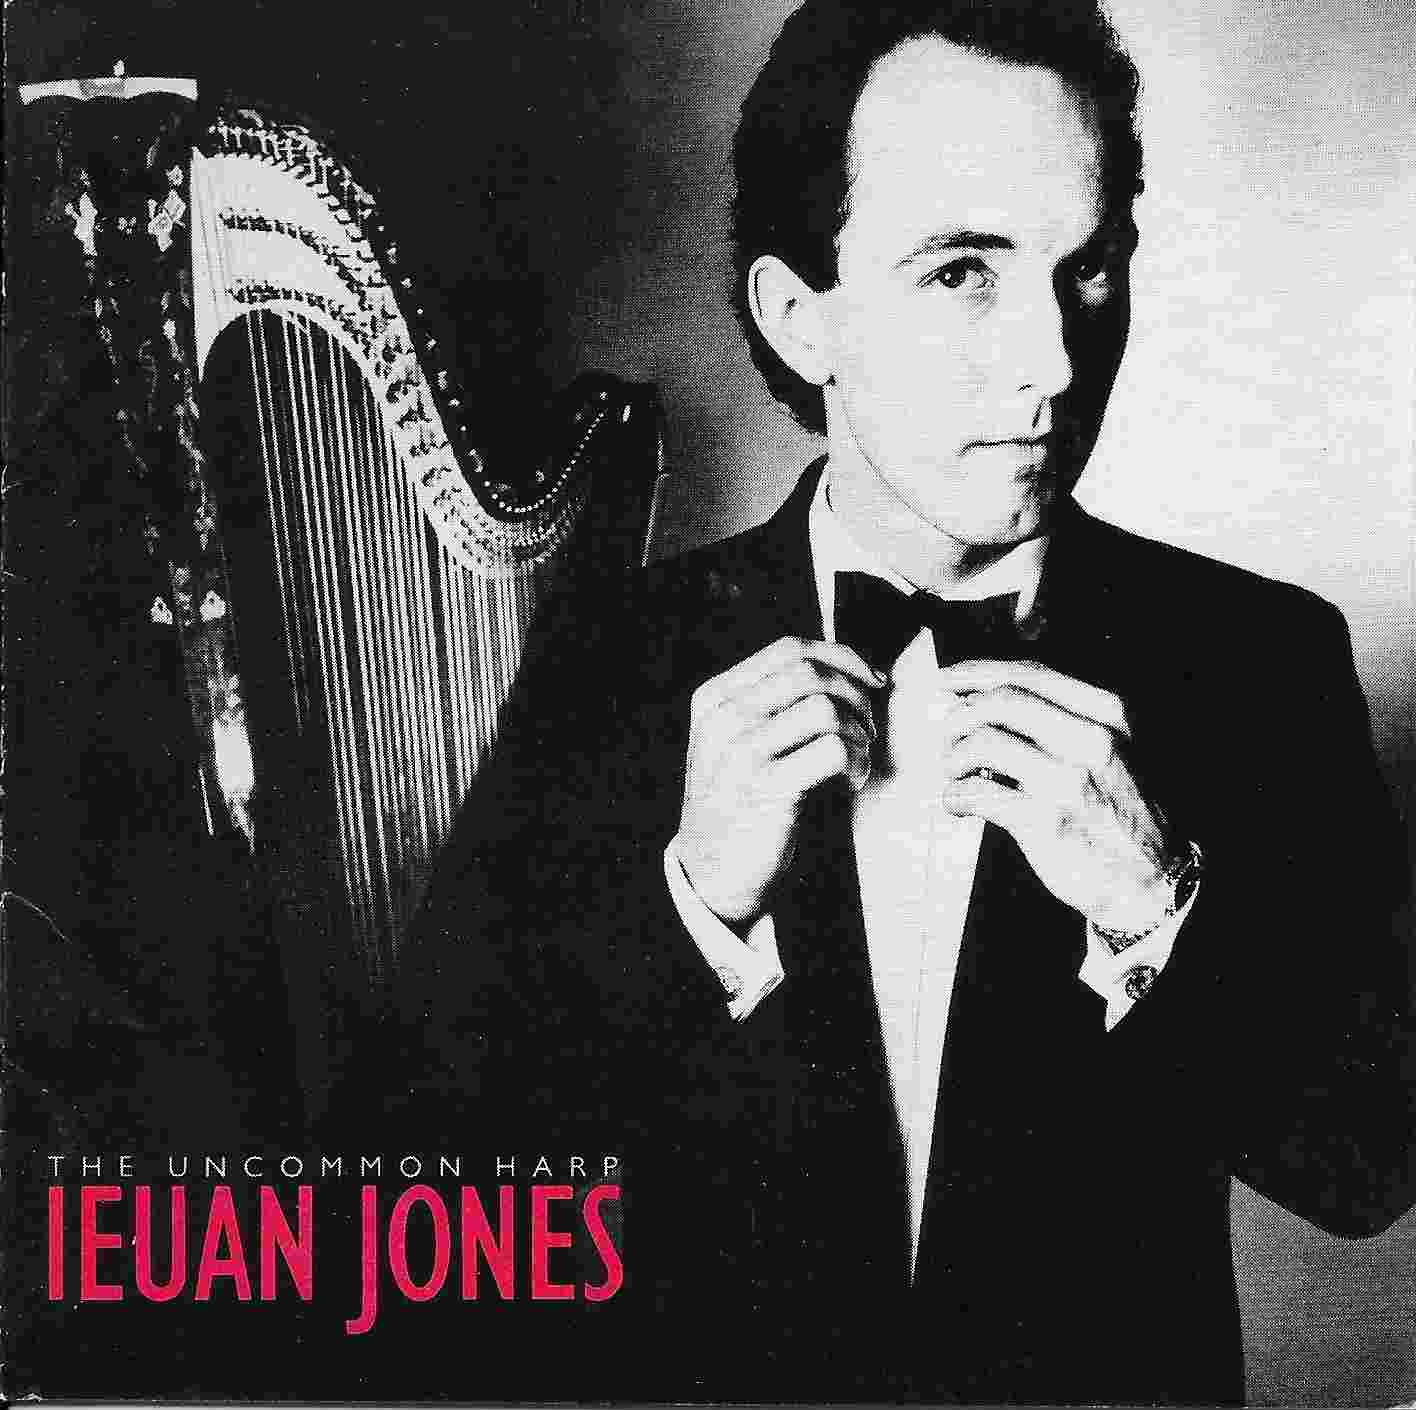 Picture of The uncommon harp by artist Ieuan Jones from the BBC cds - Records and Tapes library